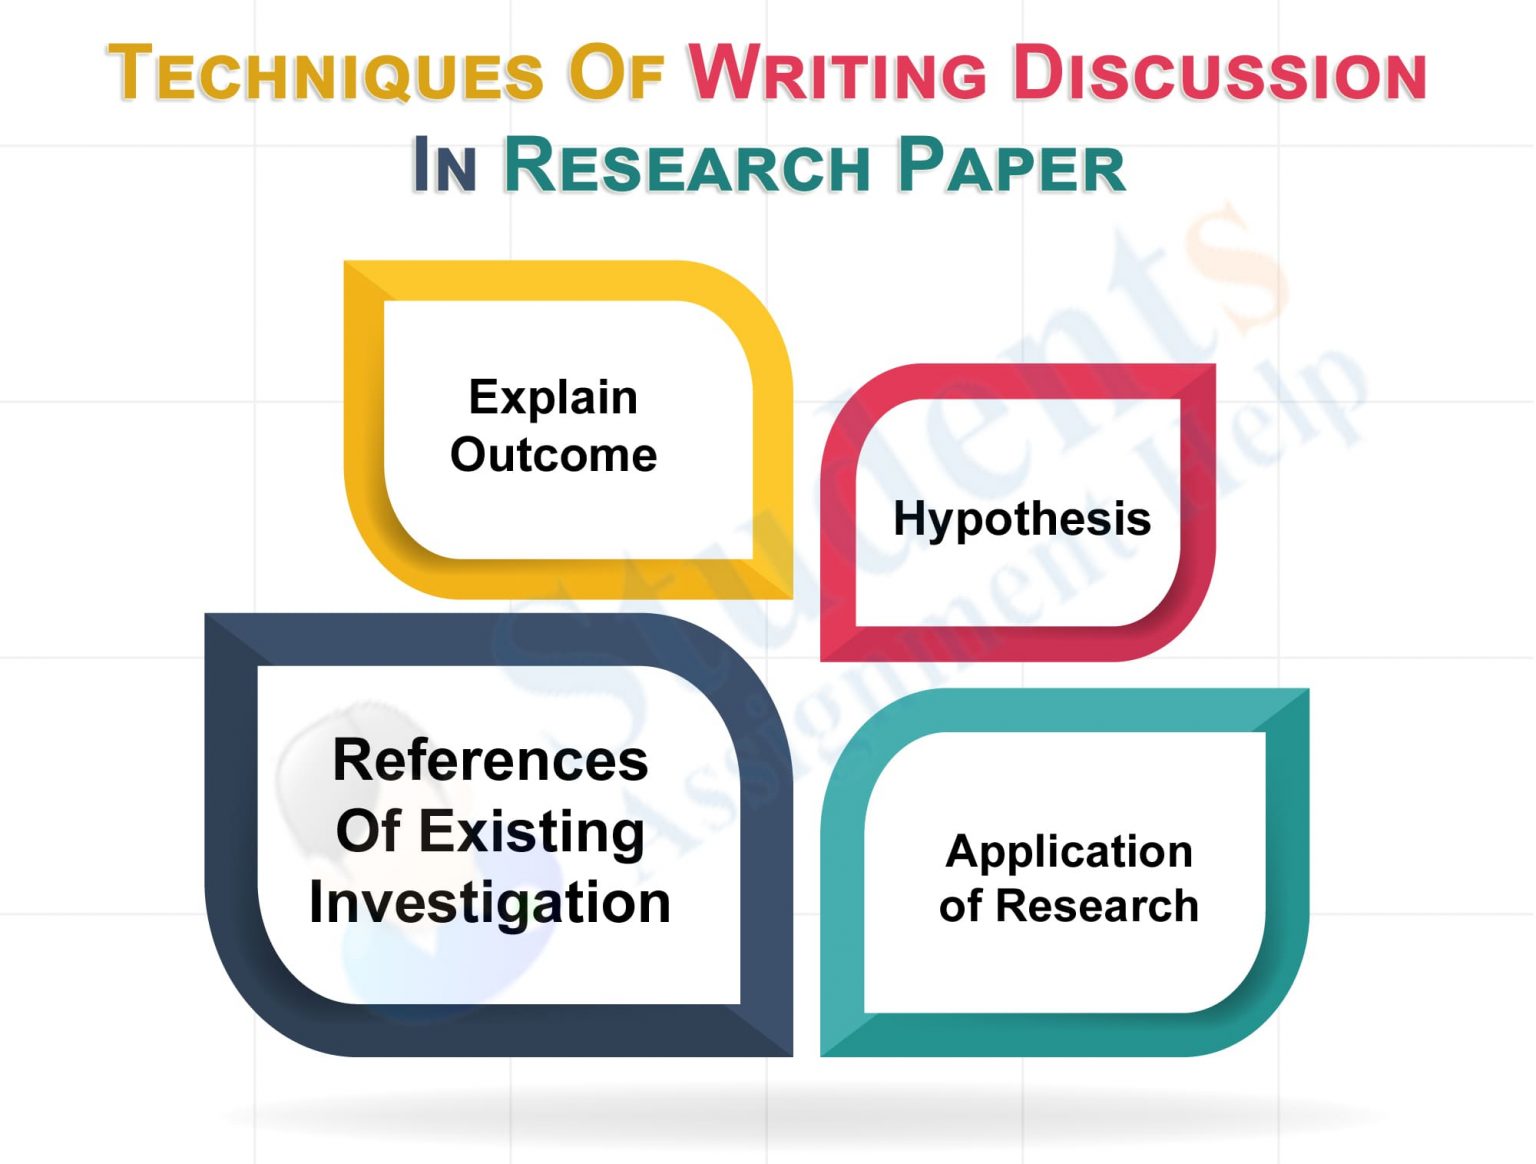 results and discussion meaning in research paper